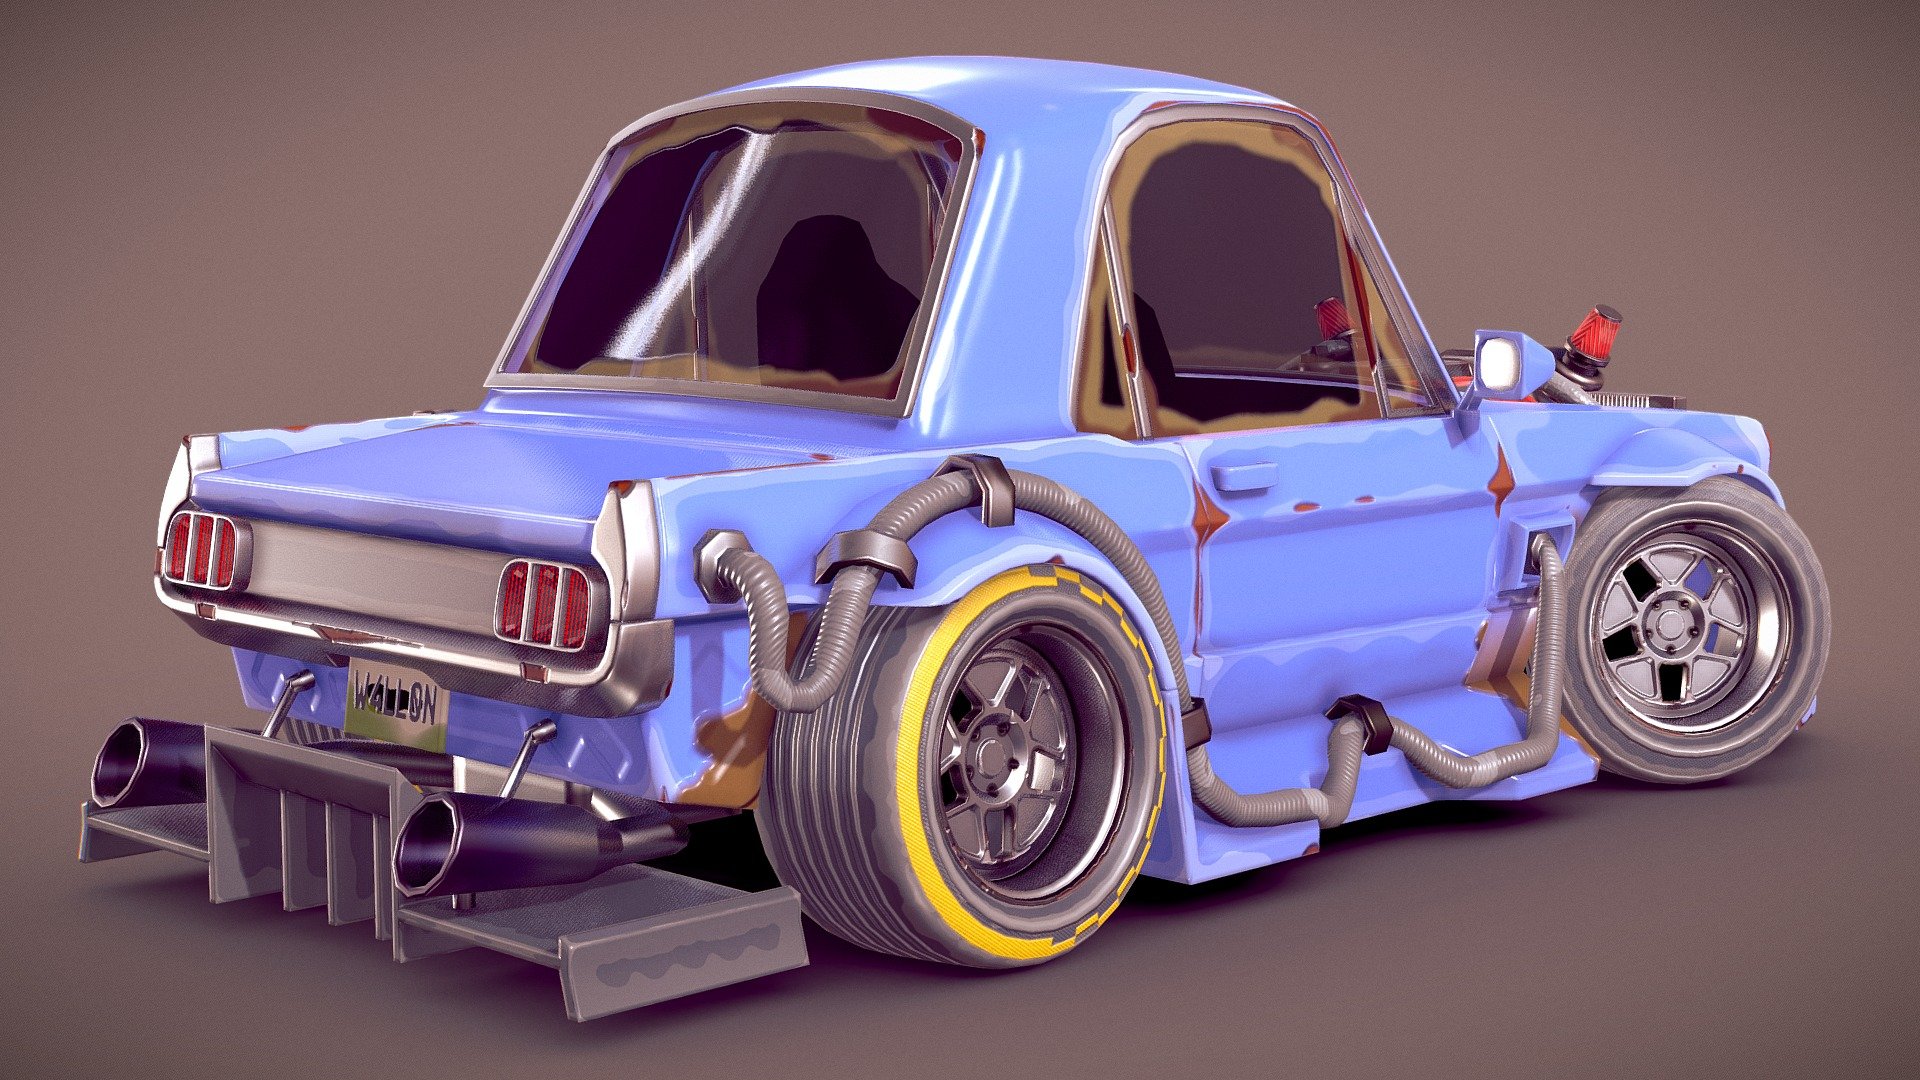 The model is based off of a 1965 Mustang, and the texture was inspired by Fortnite. Unfortunately, this model is not for free download, as it is not optimized. However, look out for more free models in this style in the future, thanks 3d model